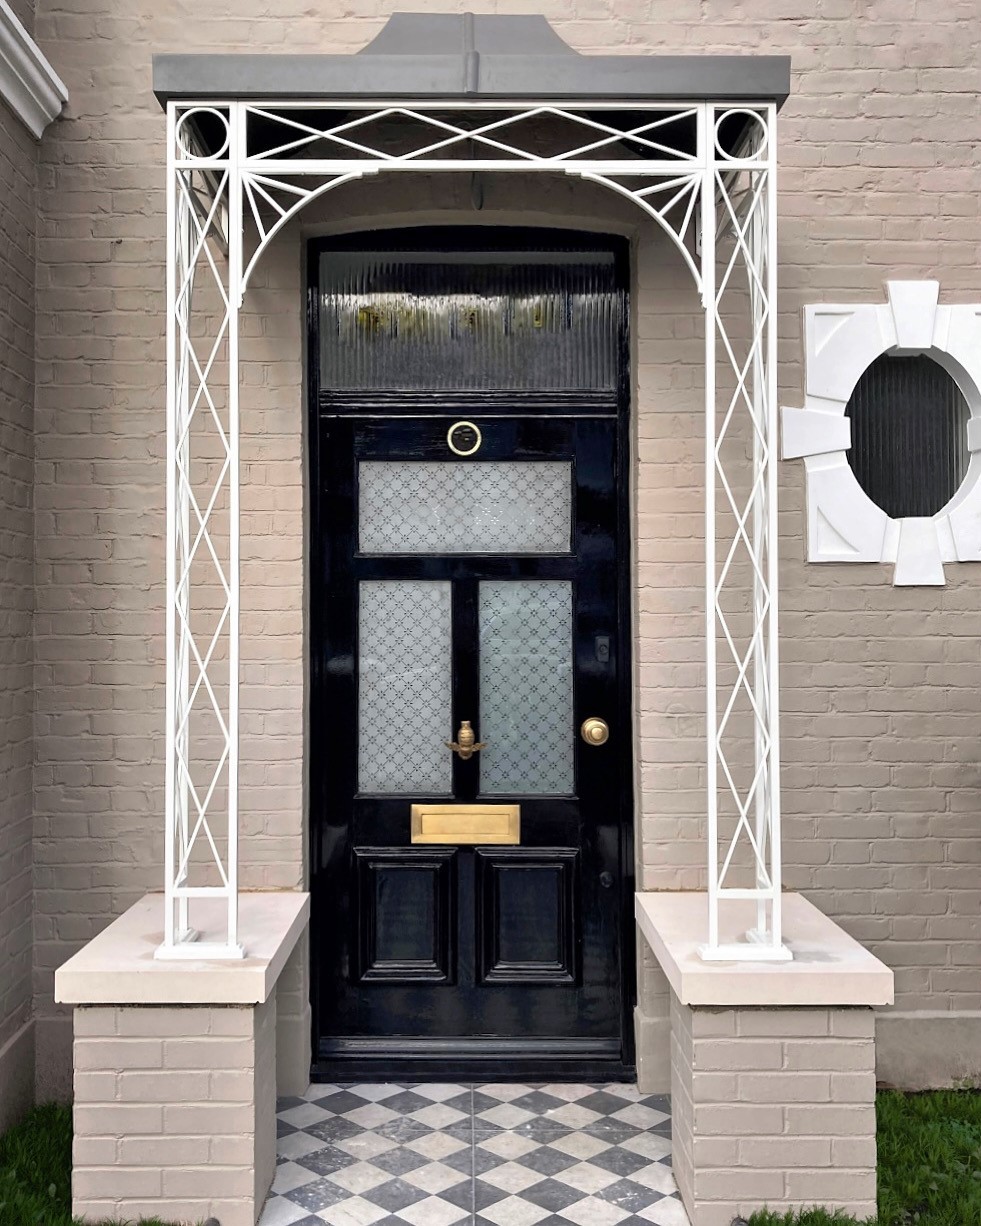 Regency design wrought iron door porch on brick plinths with our popular zintec roof awning which has been powder-coated in a lead grey